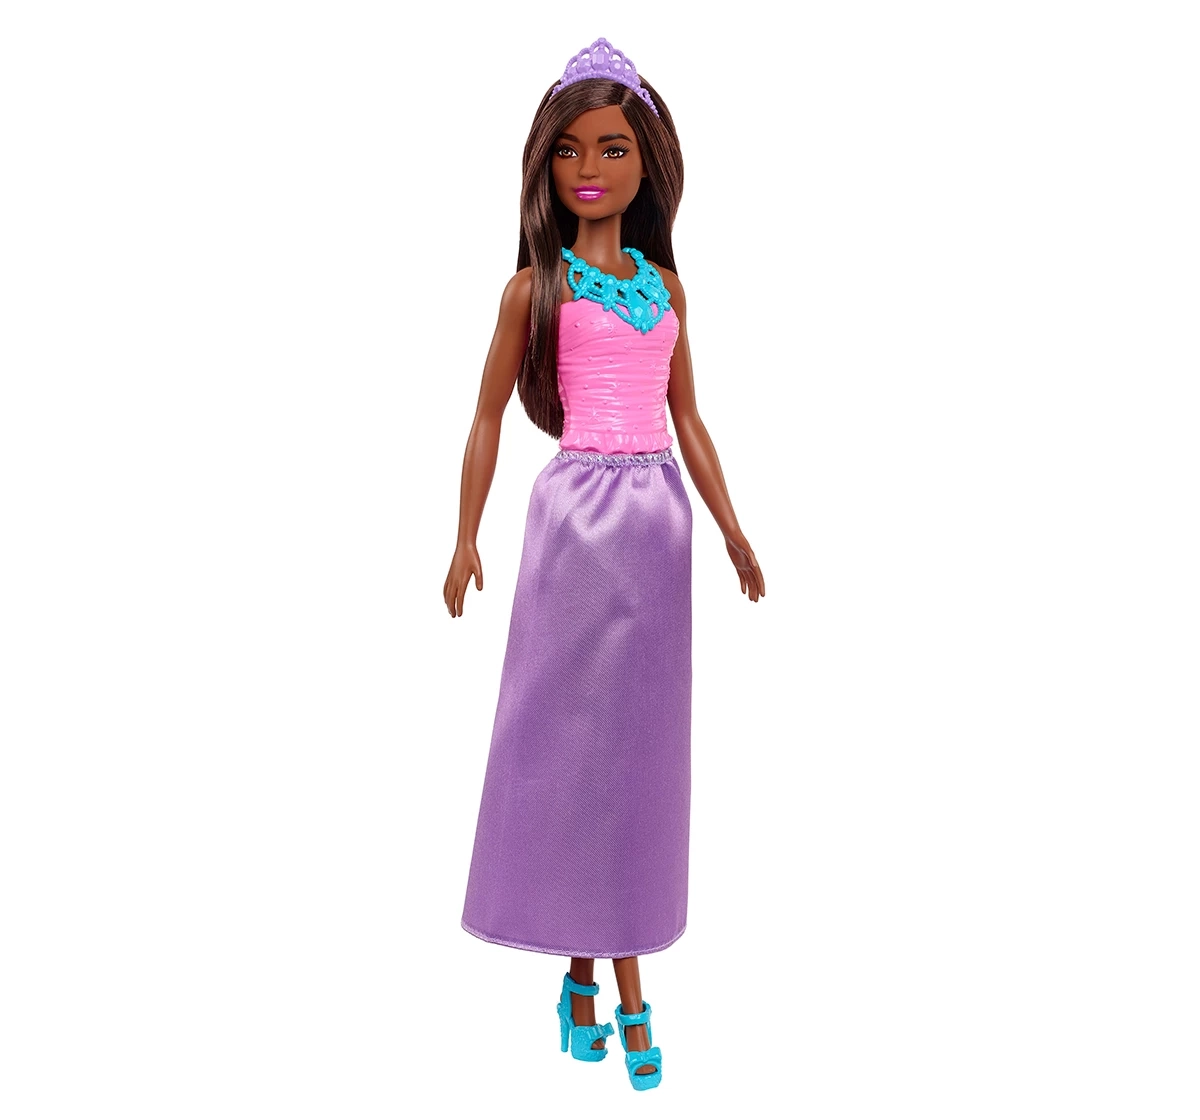 Barbie Dreamtopia Fashionistas Doll, Brown Hair, Toy for Kids Ages 3Y+, Assorted